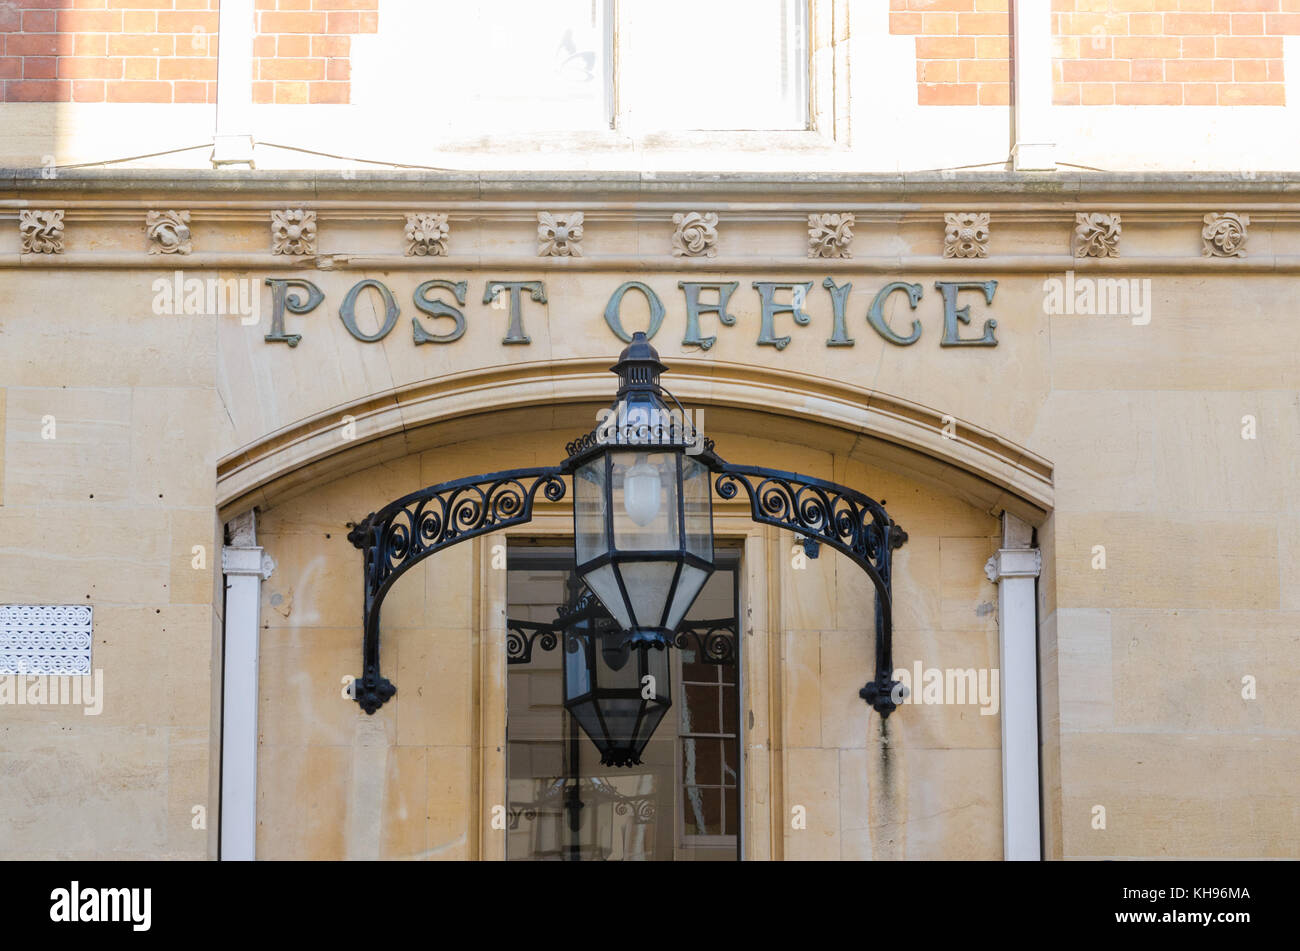 Old post office building in Old Square, Warwick, Warwickshire, UK with Post Office sign above entrance and large black steel lantern Stock Photo